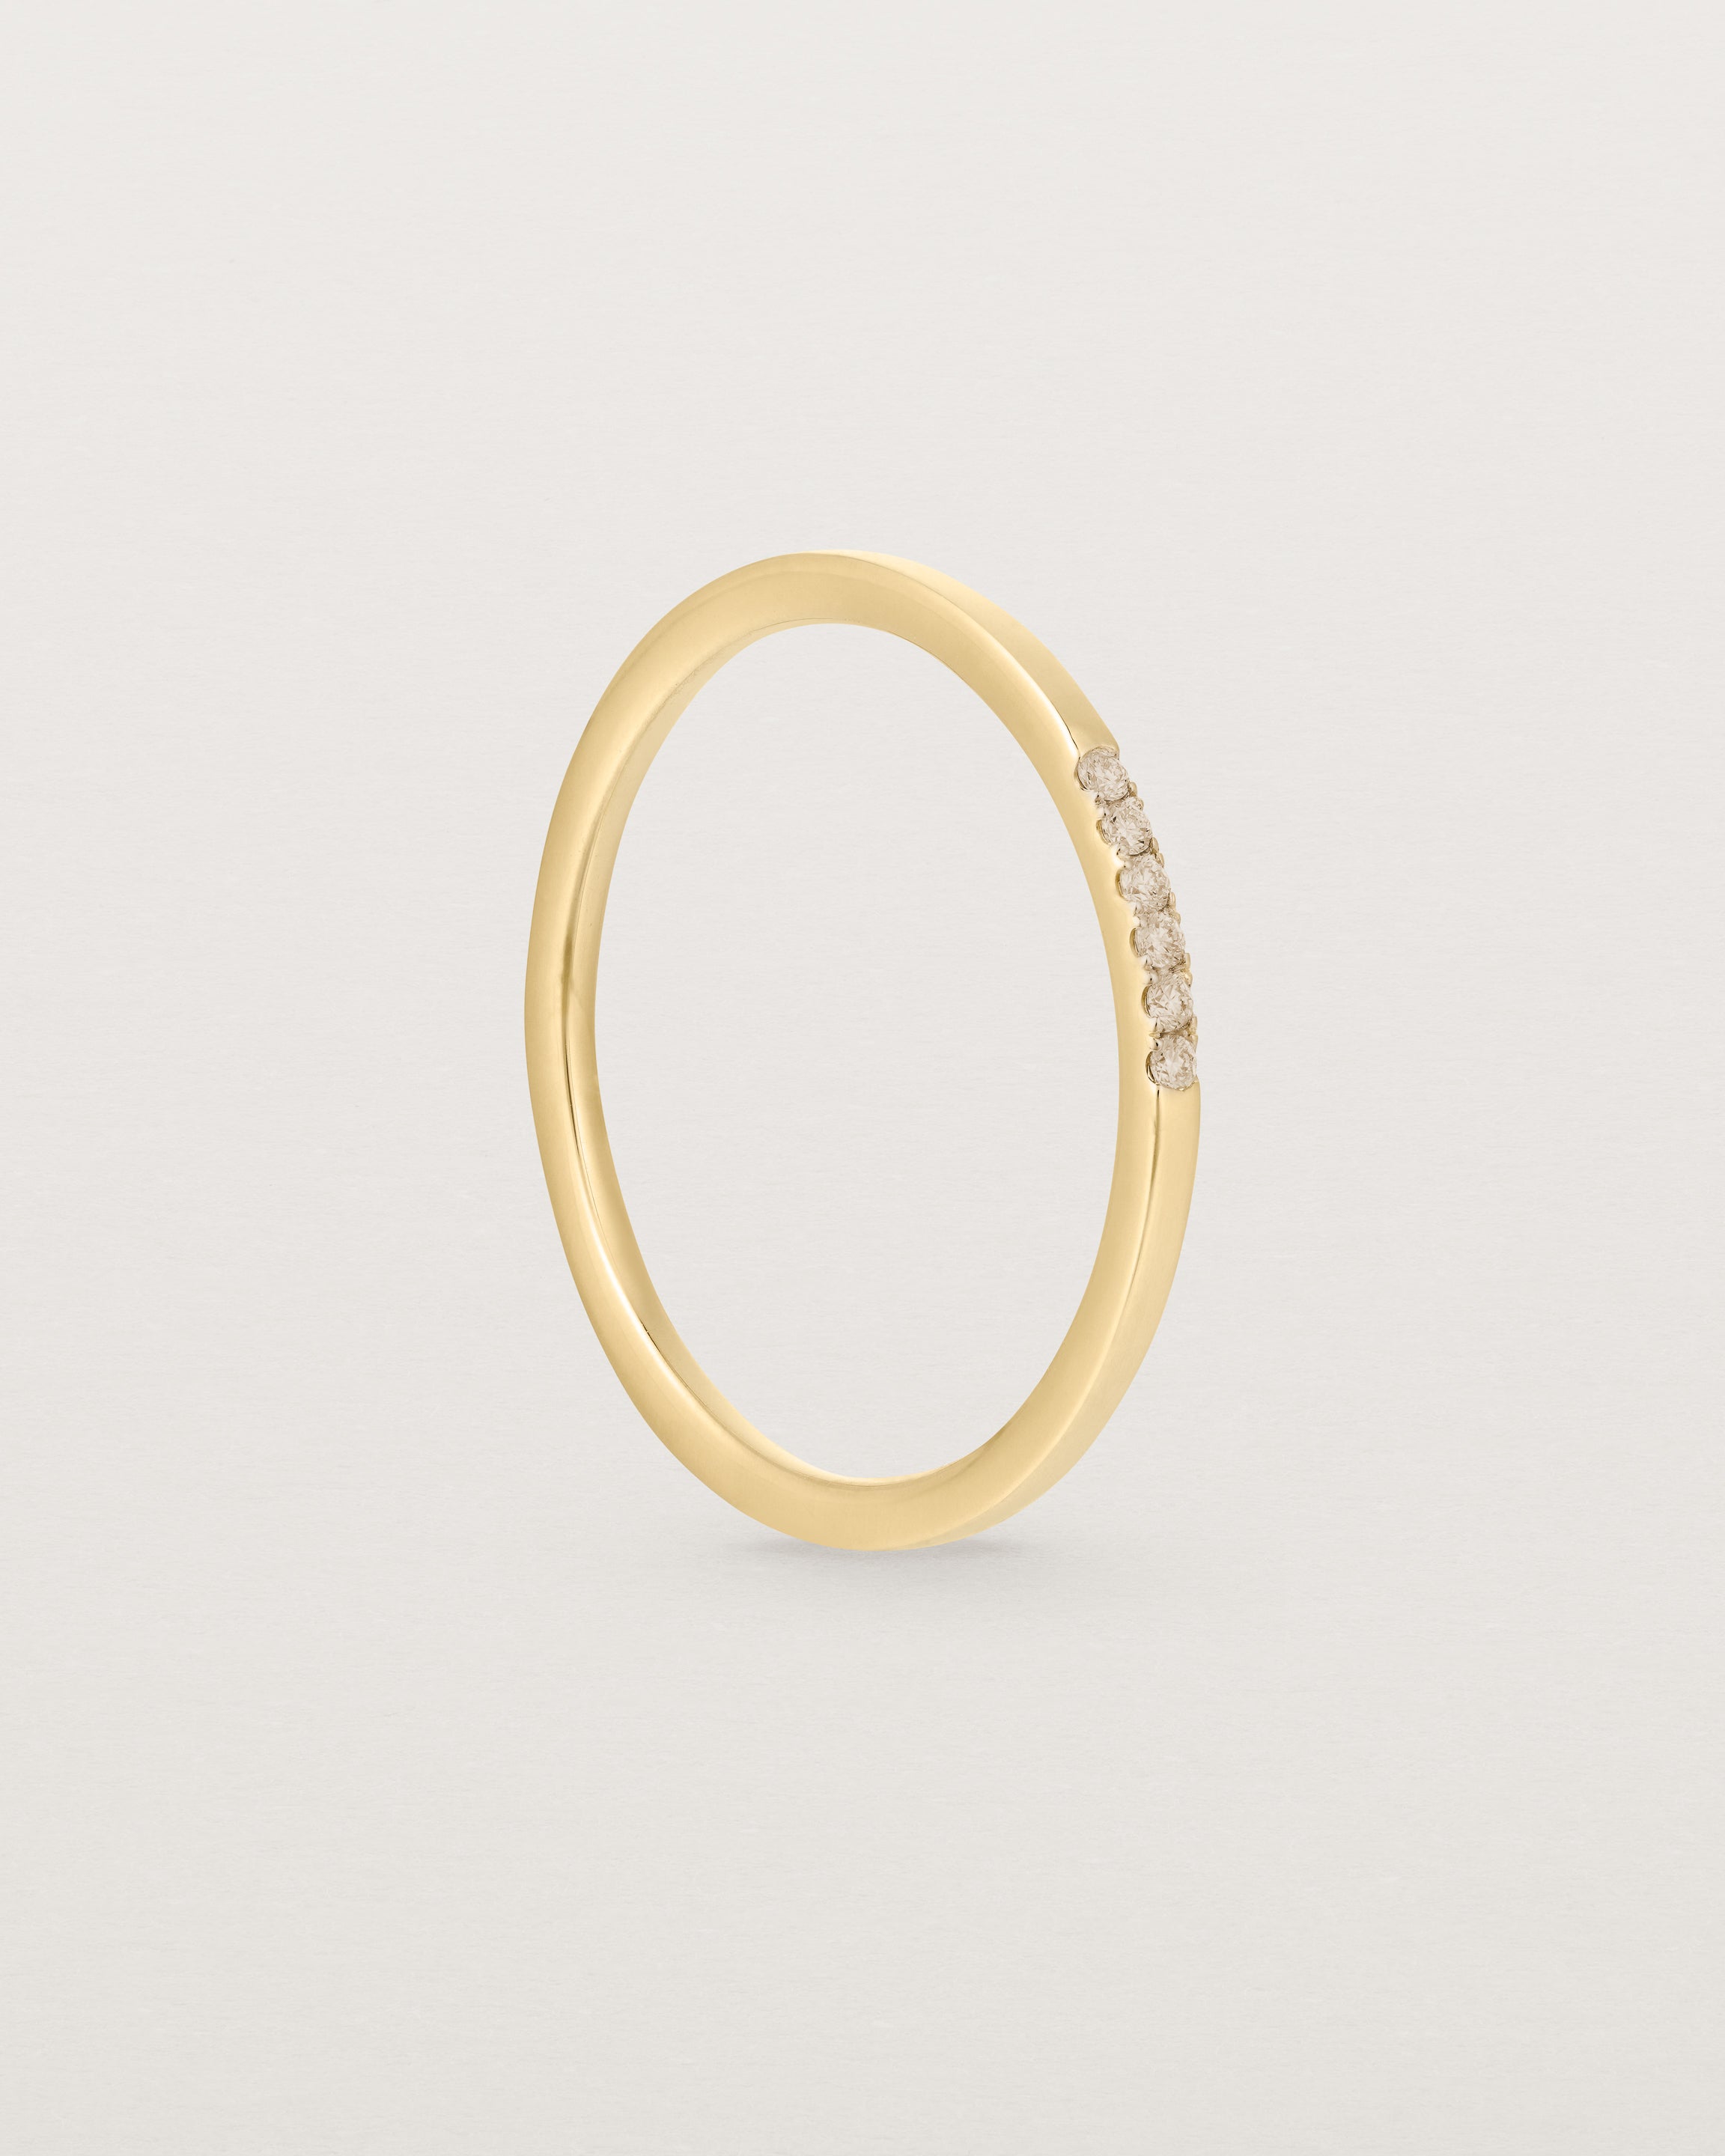 Standing view of the Six Stone Queenie Ring | Champagne Diamonds | Yellow Gold.